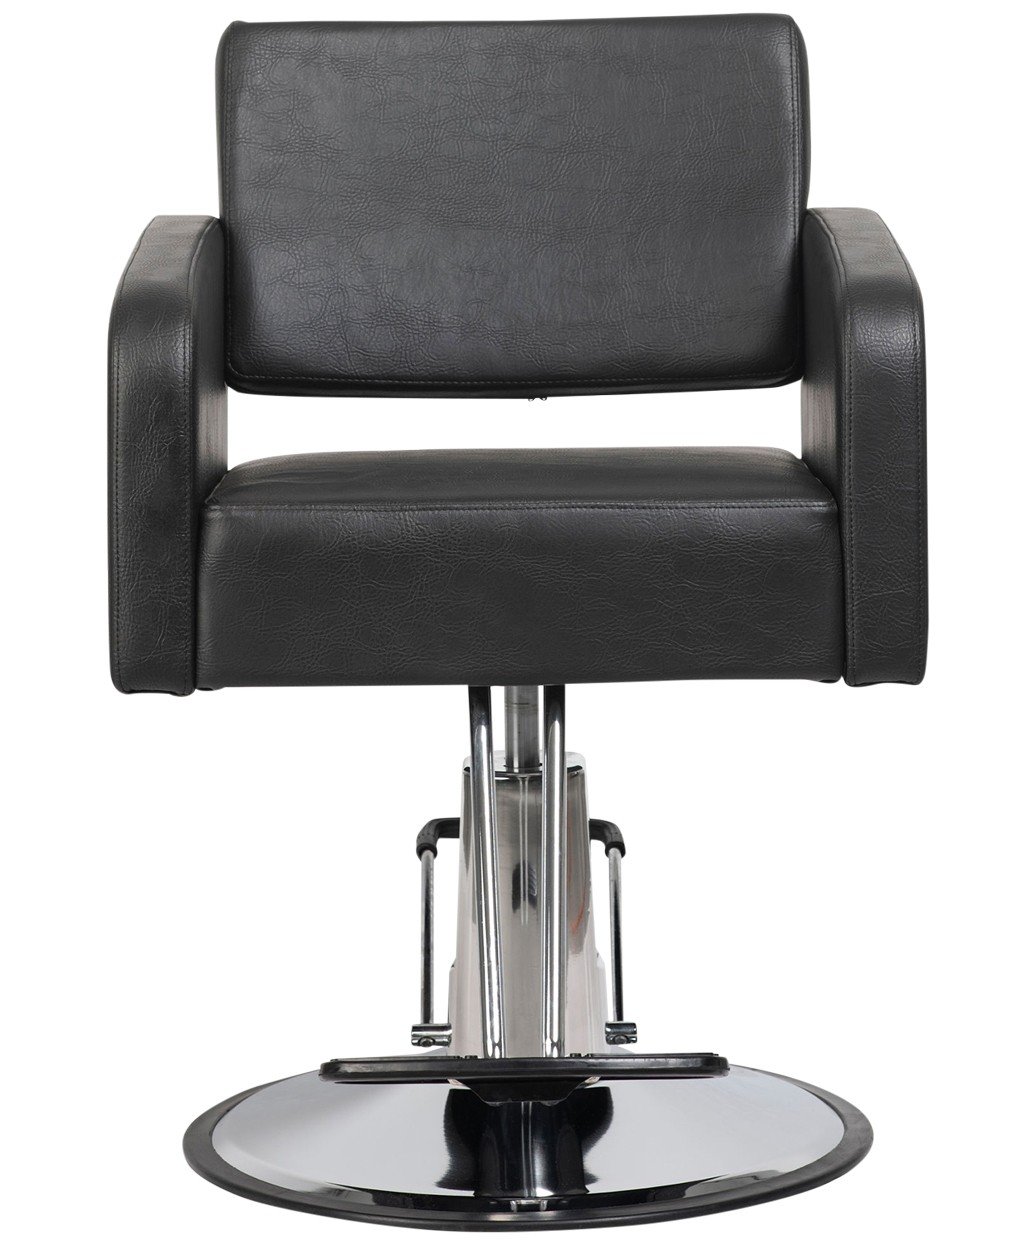 Shelby Styling Chair